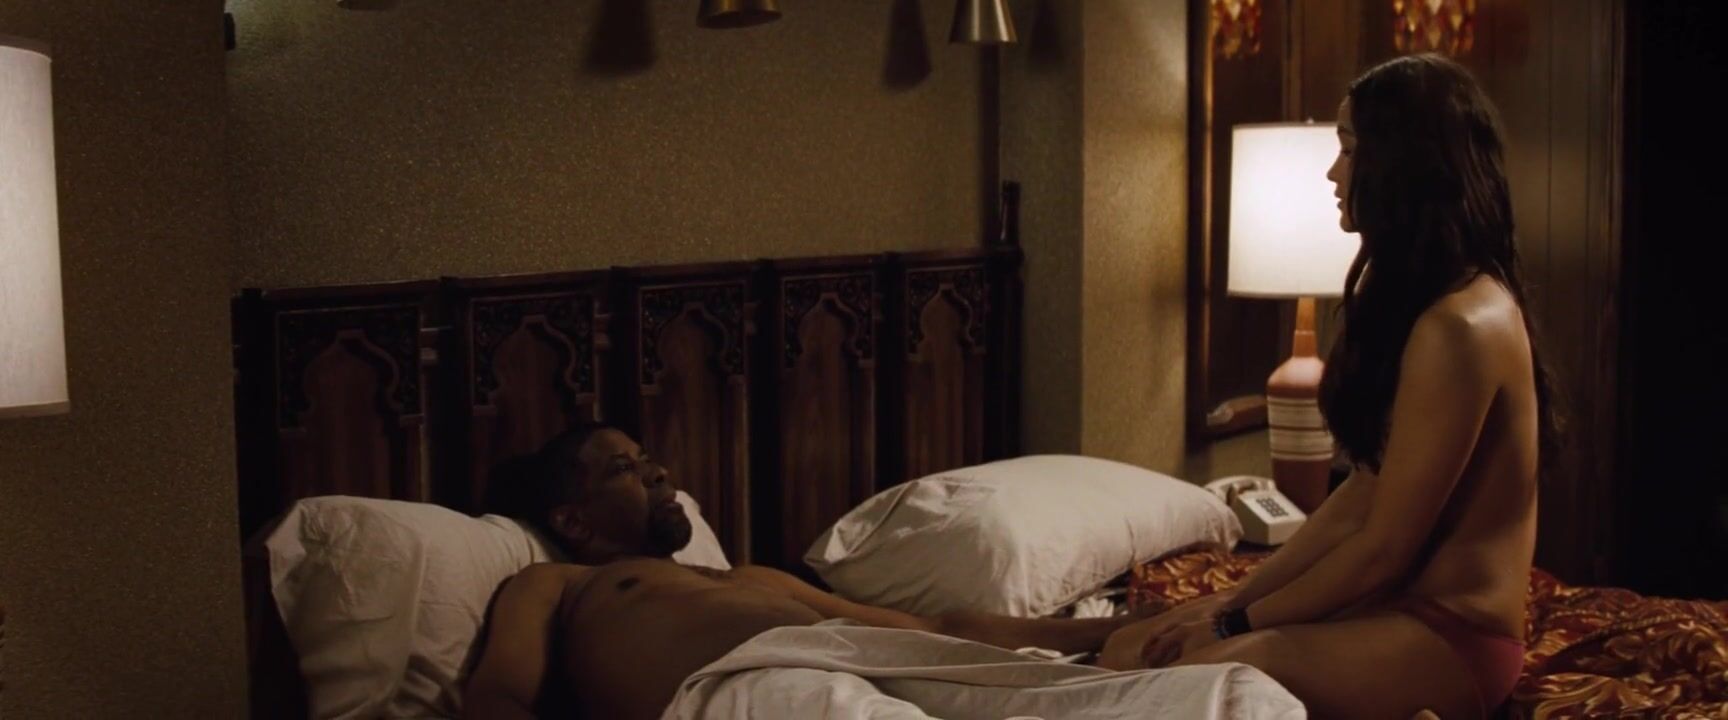 WorldSex Paula Patton manages to excite black man during the naked moment from 2 Guns movie Hot Girl Fucking